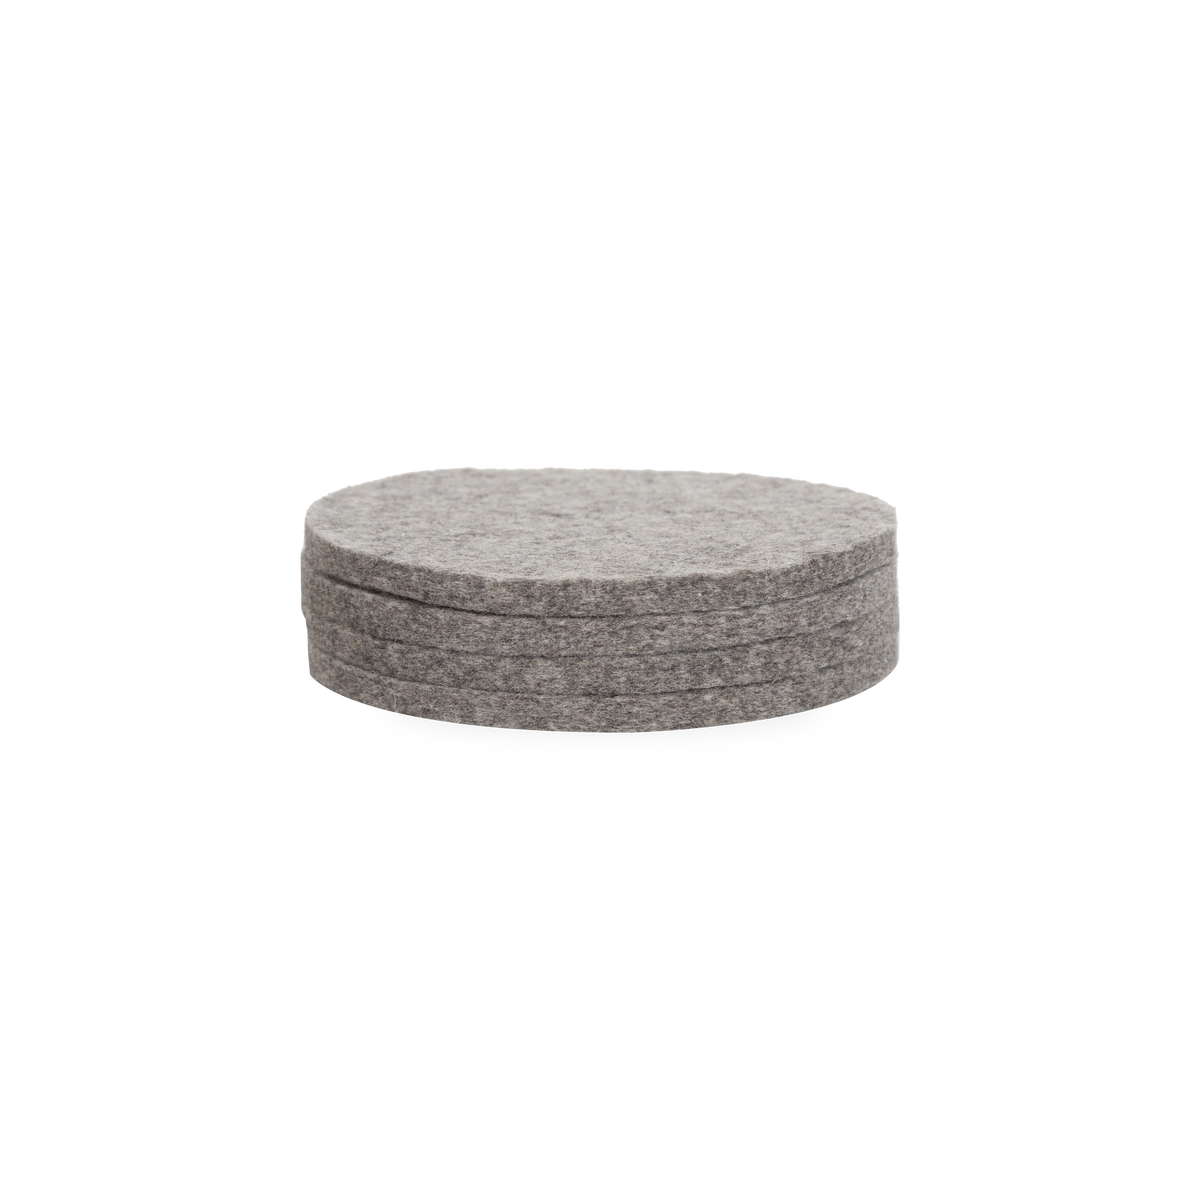 Made from the highest quality German merino wool, these Round Felt Coasters have a minimalist design that focuses on functional material.